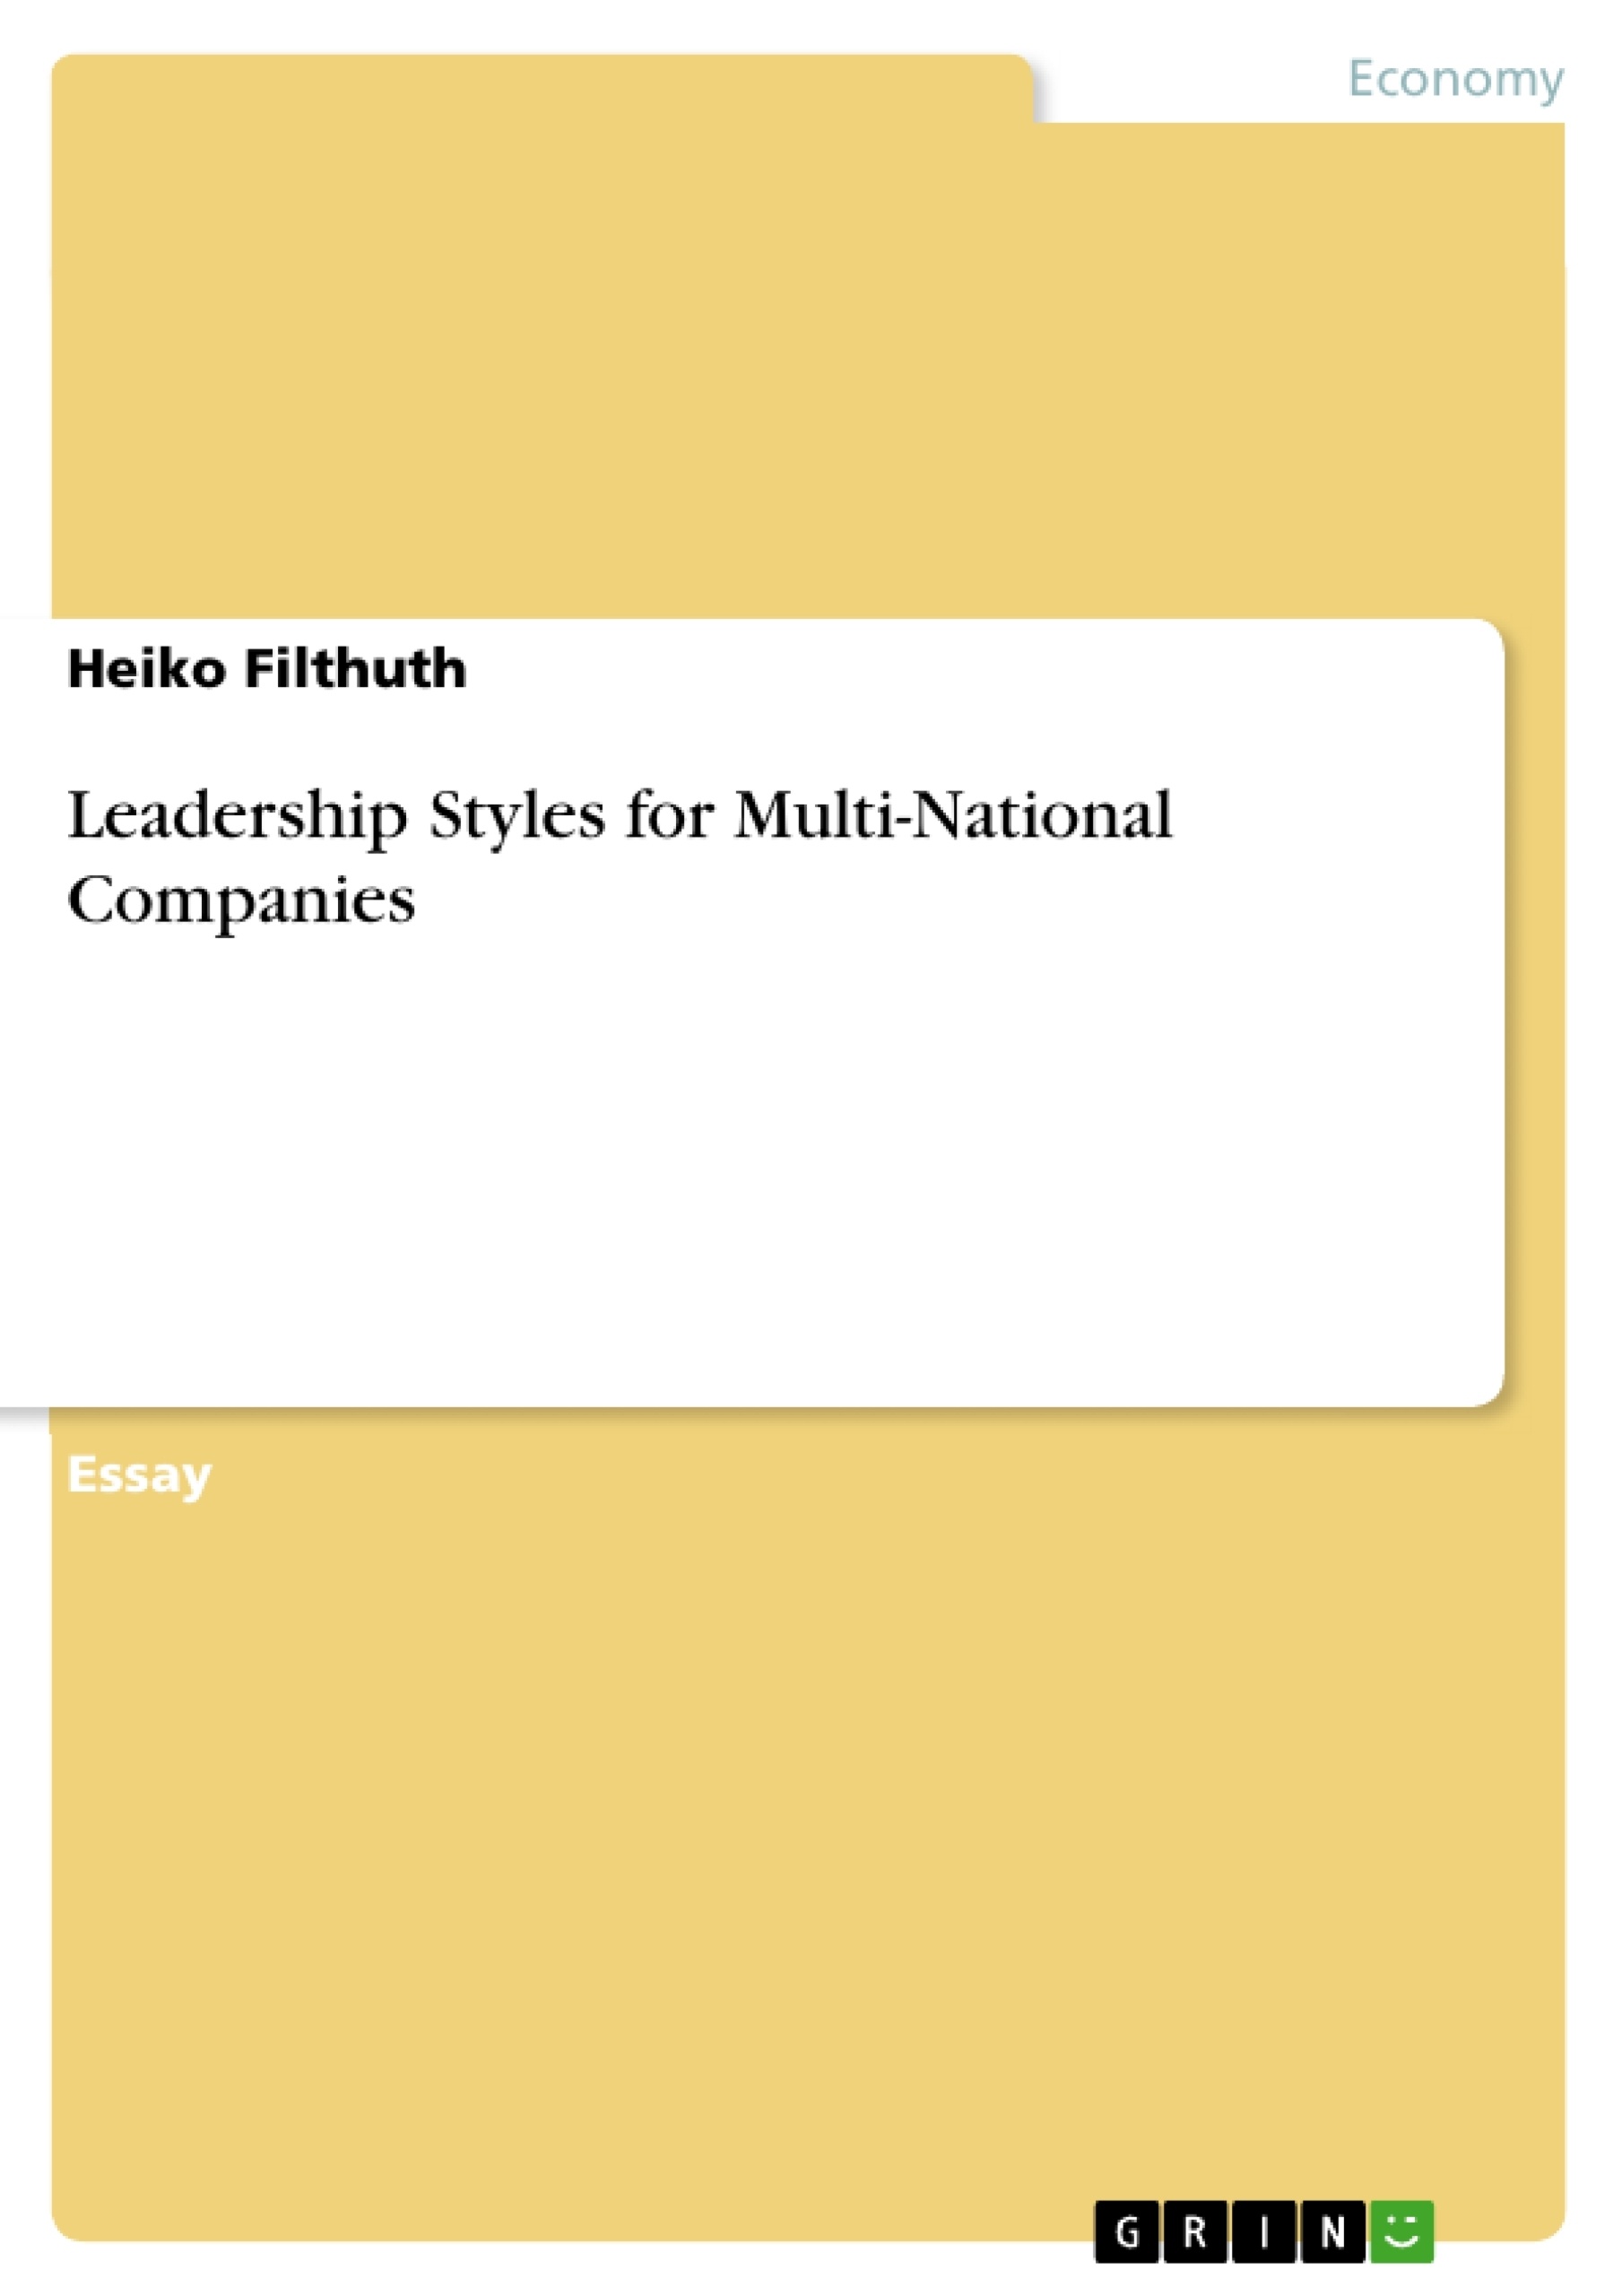 Title: Leadership Styles for Multi-National Companies